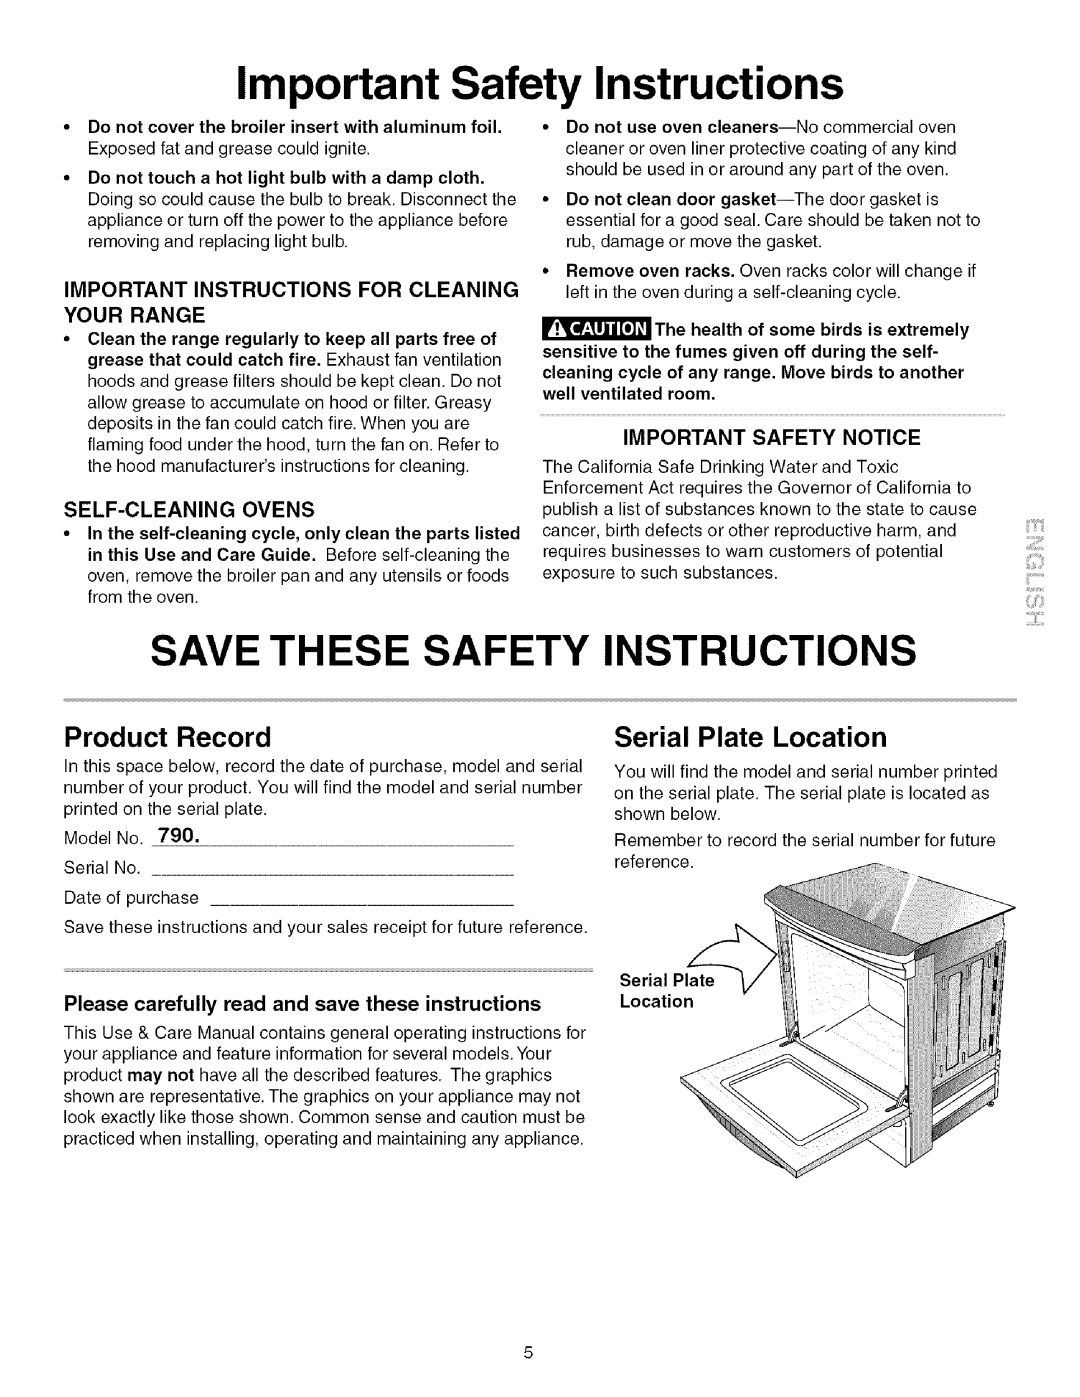 Kenmore 790.4672 manual Save These Safety, Product Record, Serial Plate Location, Important Safety Instructions 